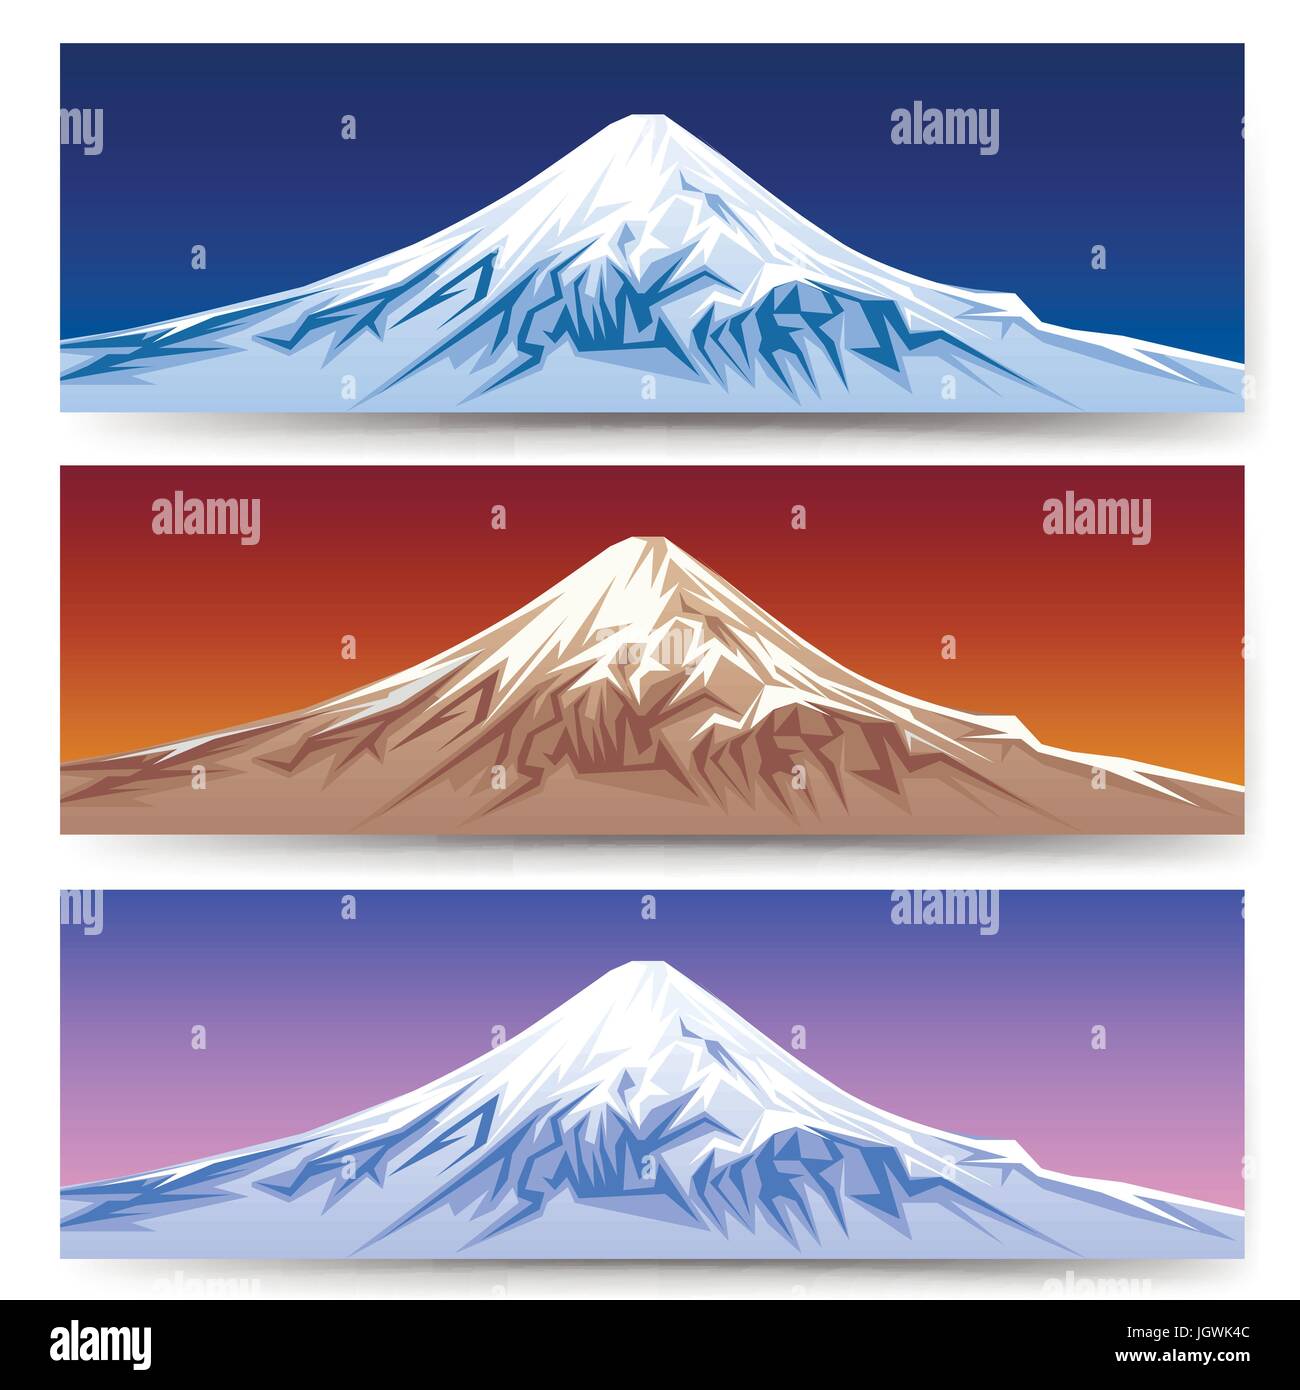 Snow capped mount fuji banners. Japan mountain panoramic landscape set for tourism designs vector illustration Stock Vector